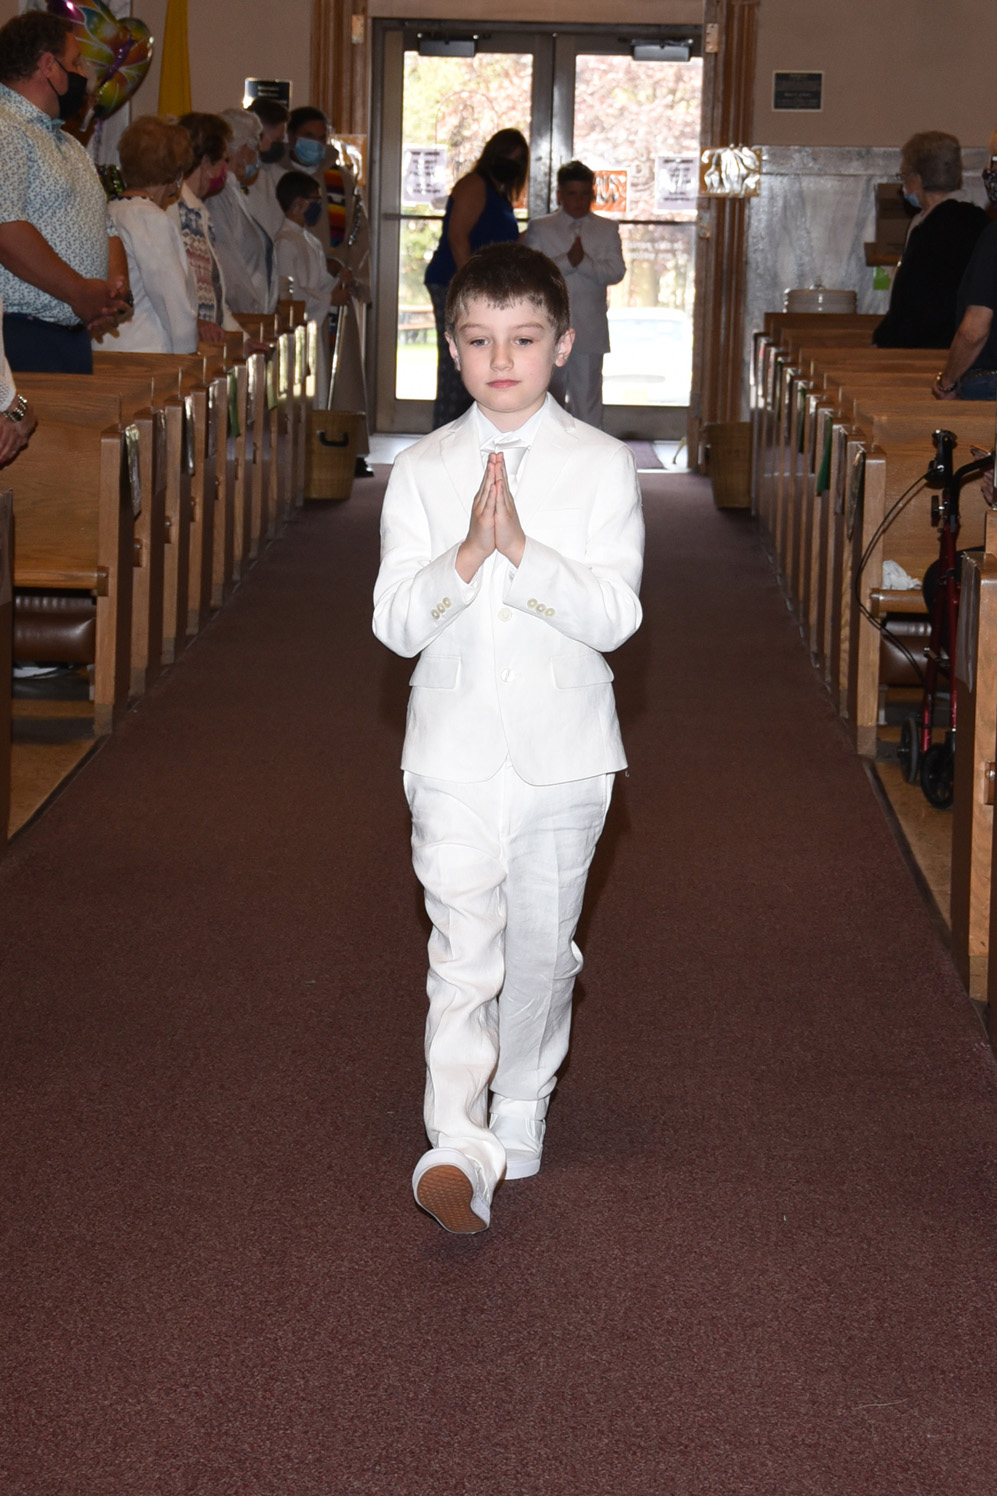 FIRST-COMMUNION-MAY-15-2021-10011061